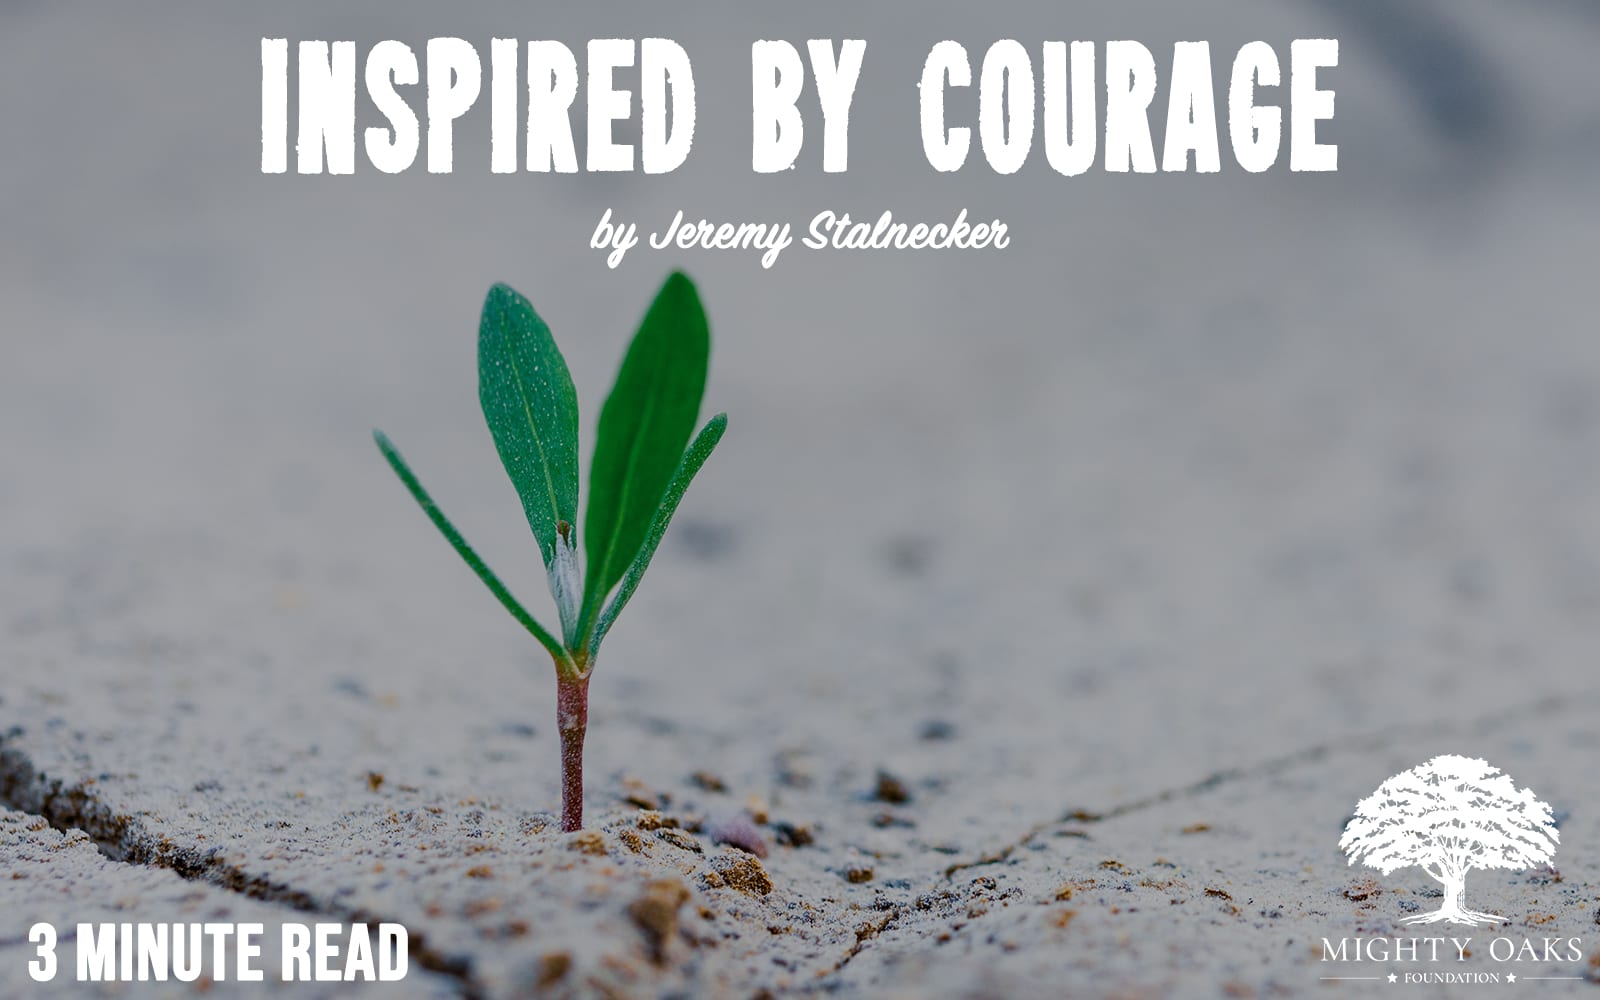 5 Top Examples of Courage. History has showcased several examples…, by Be  An Inspirer